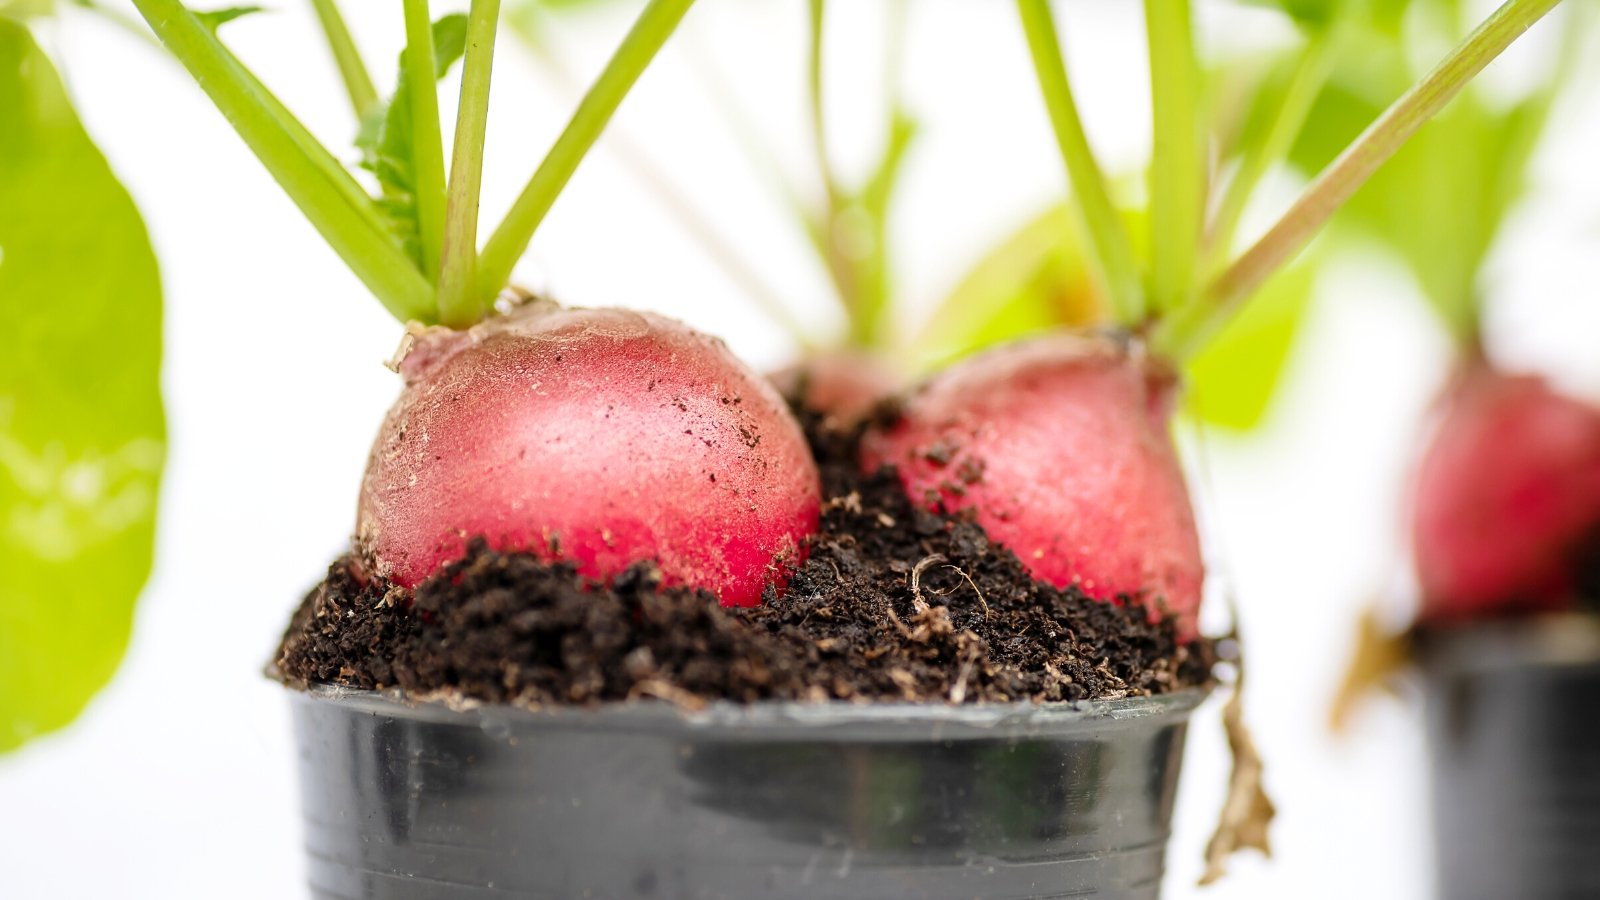 10 Tips for Growing Radishes in Pots or Containers